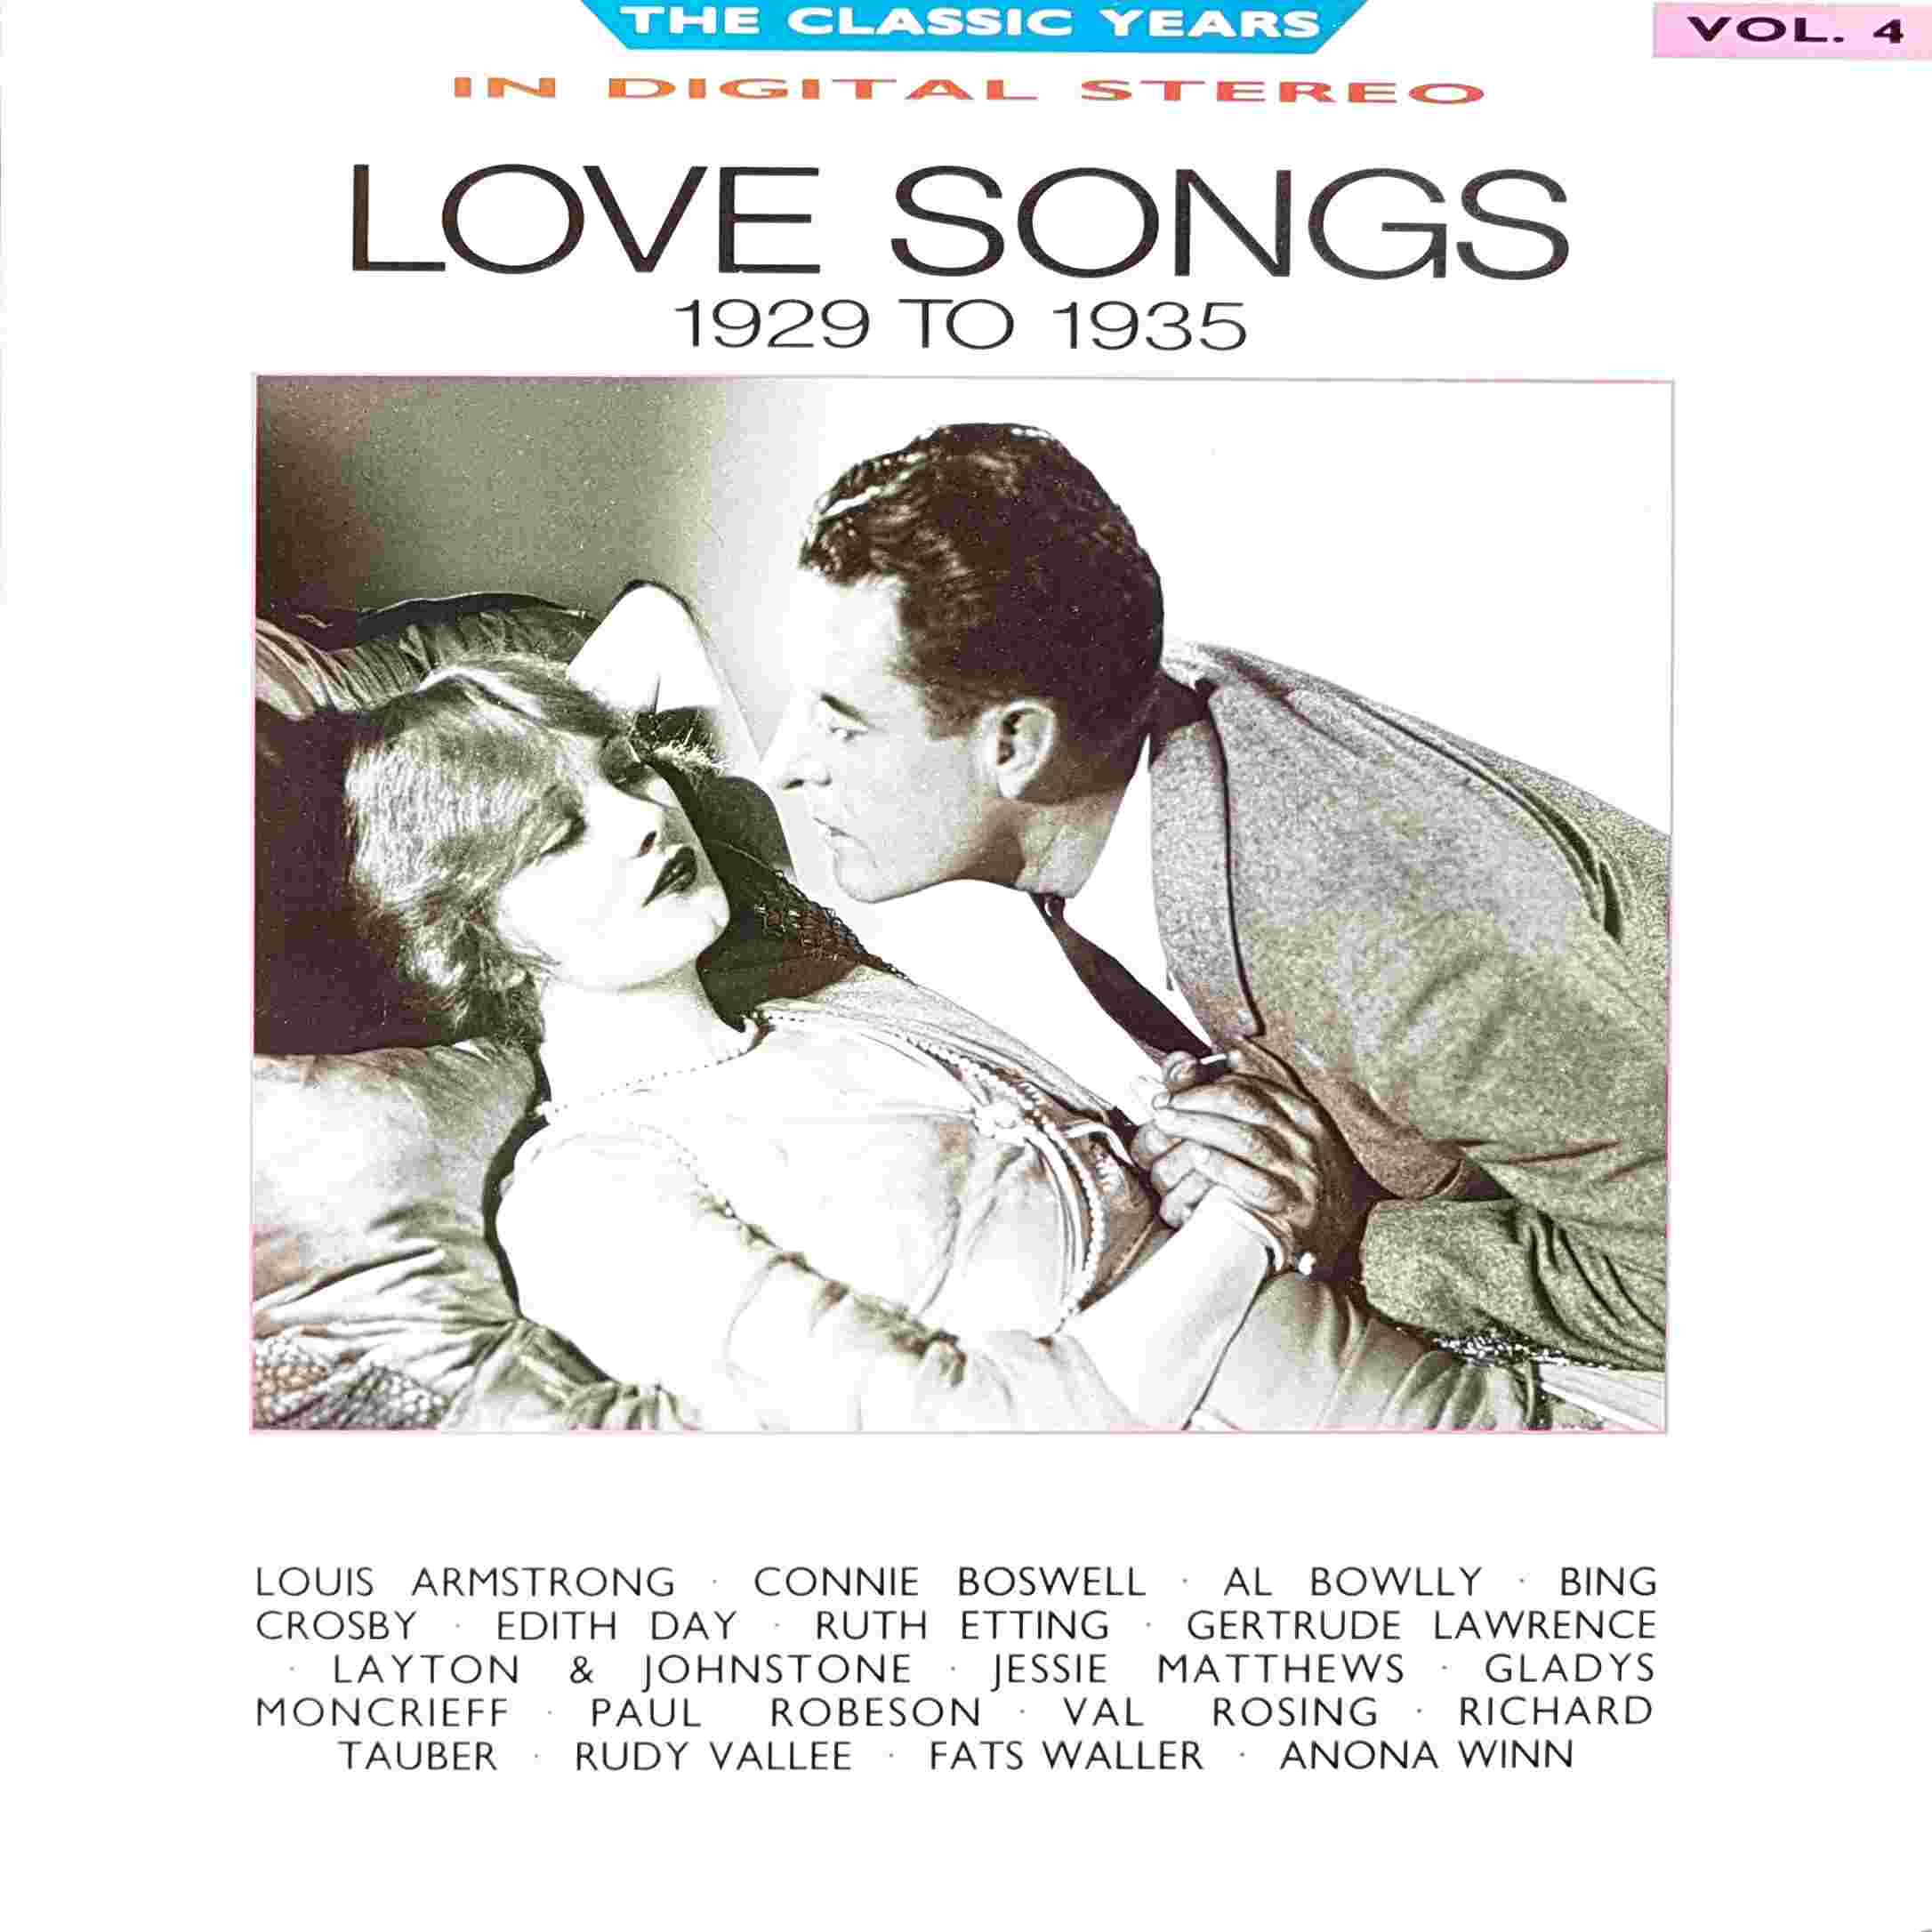 Picture of REB 651 Classic years - Volume 4, Love songs by artist Various from the BBC albums - Records and Tapes library